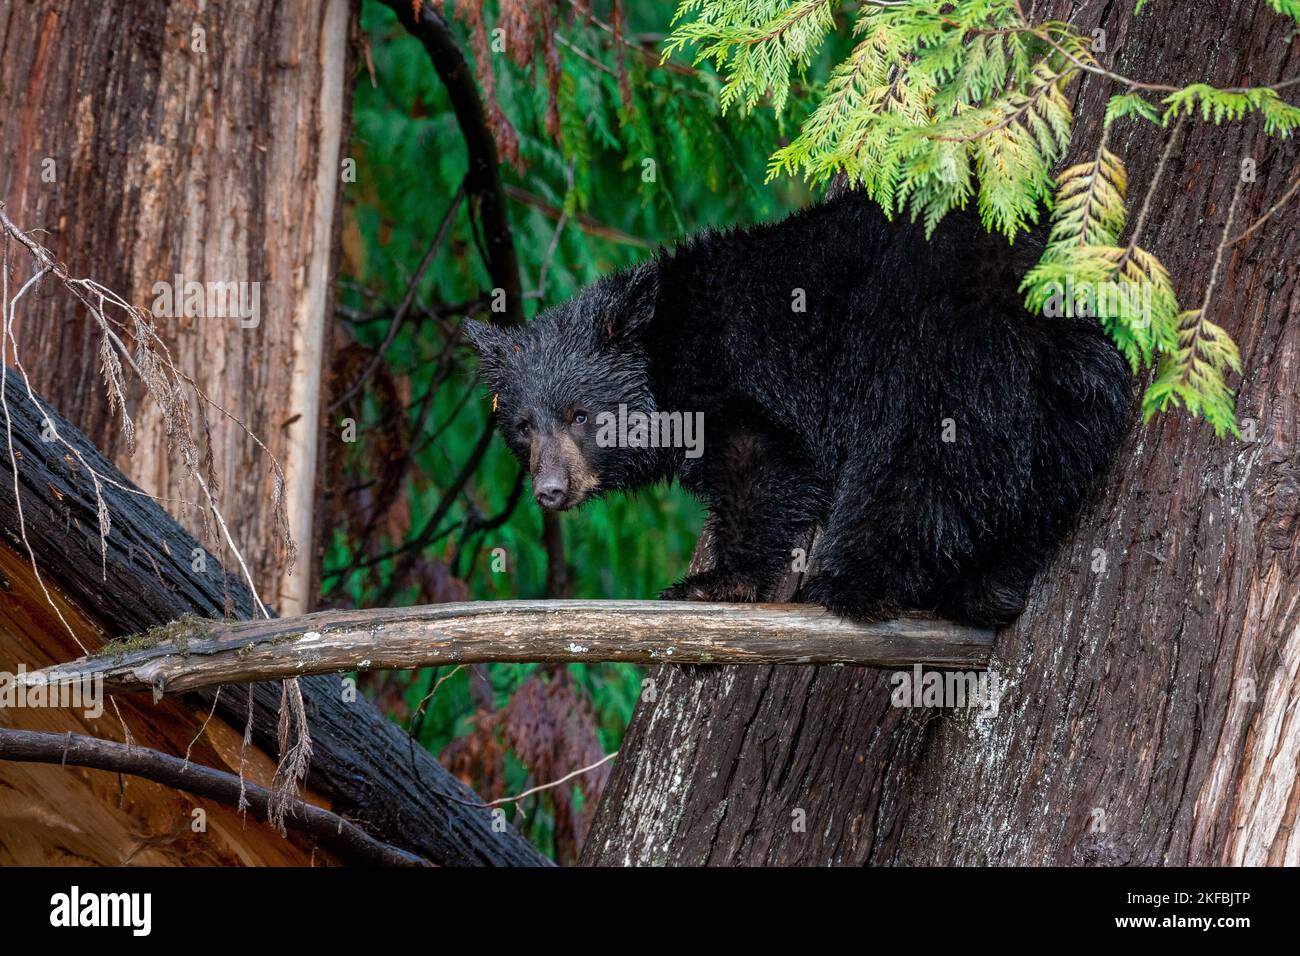 A cute black bear cub huddled up on a thin tree branch, scared to jump down in a sunny forest Stock Photo